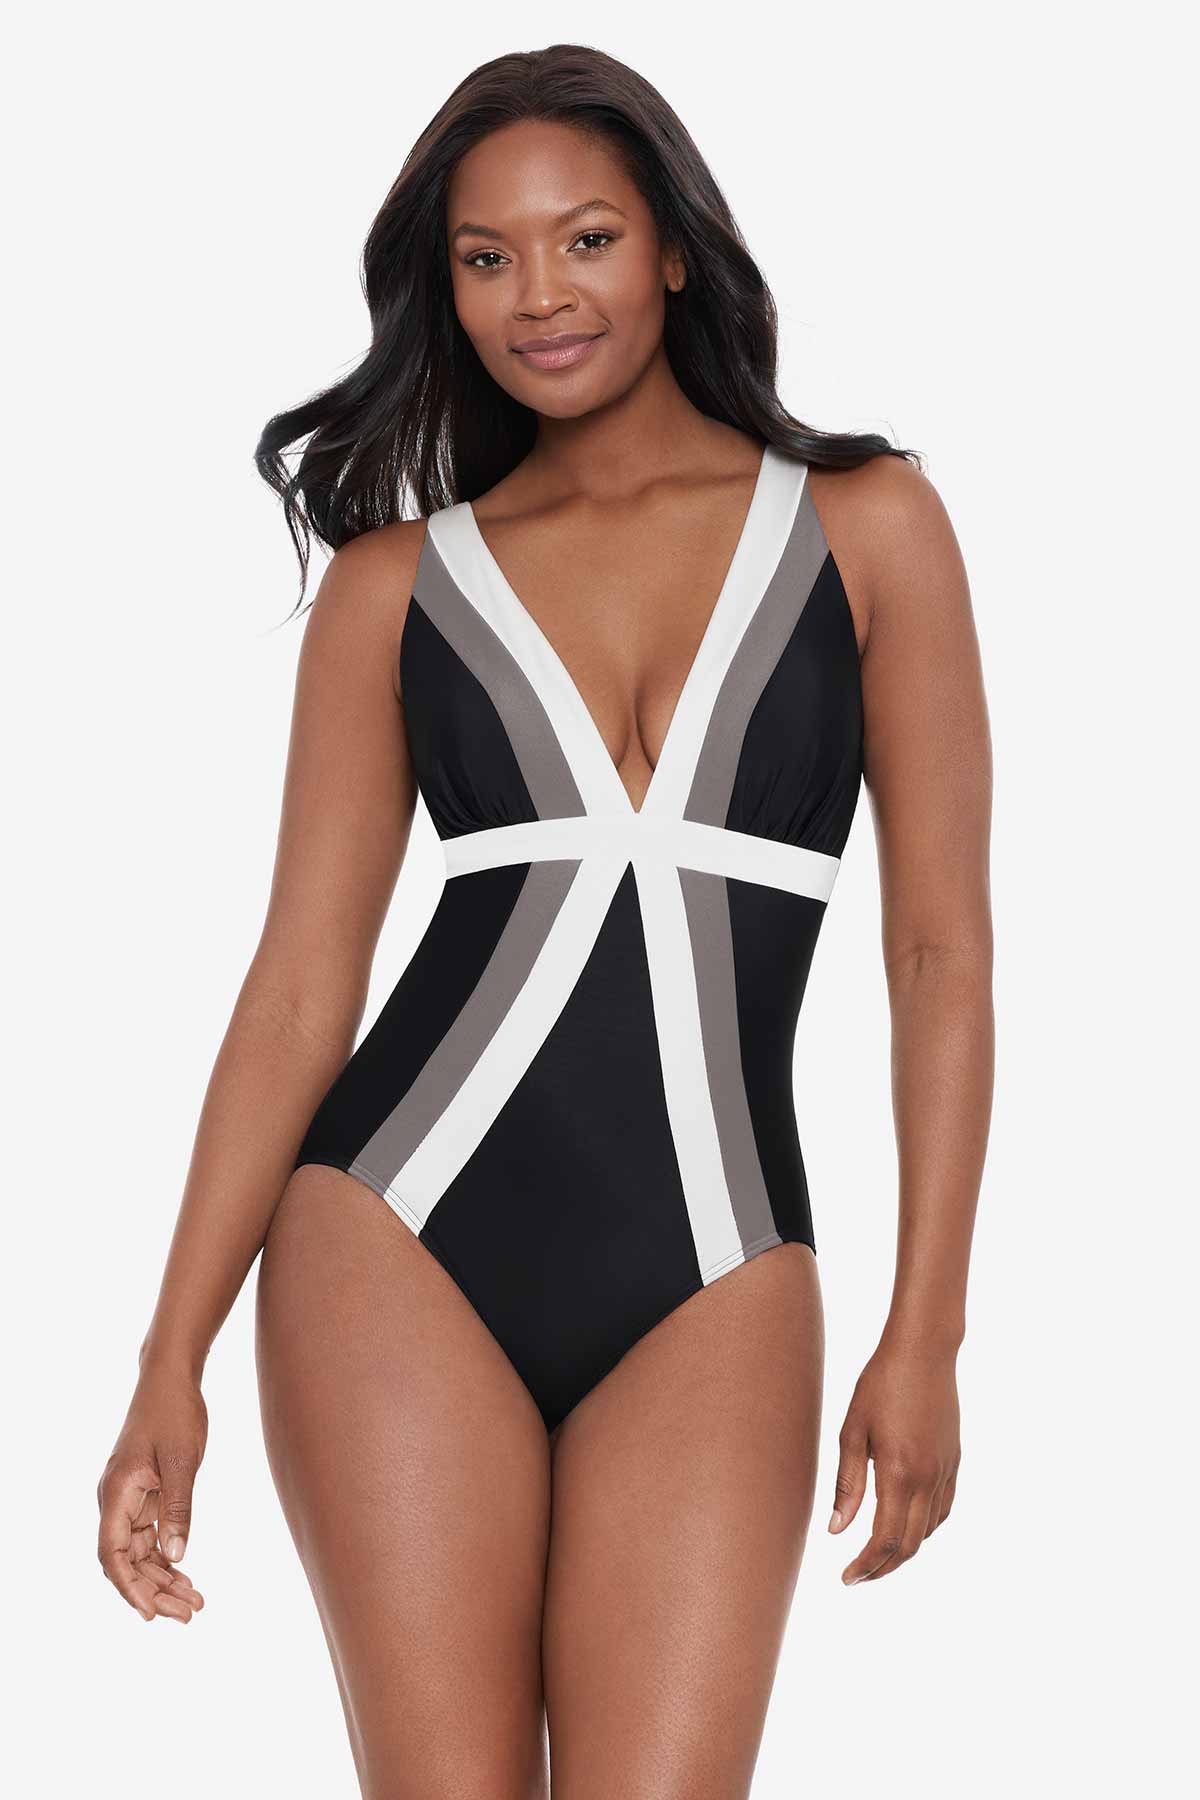 Women's Black and White Reducer Swimsuit